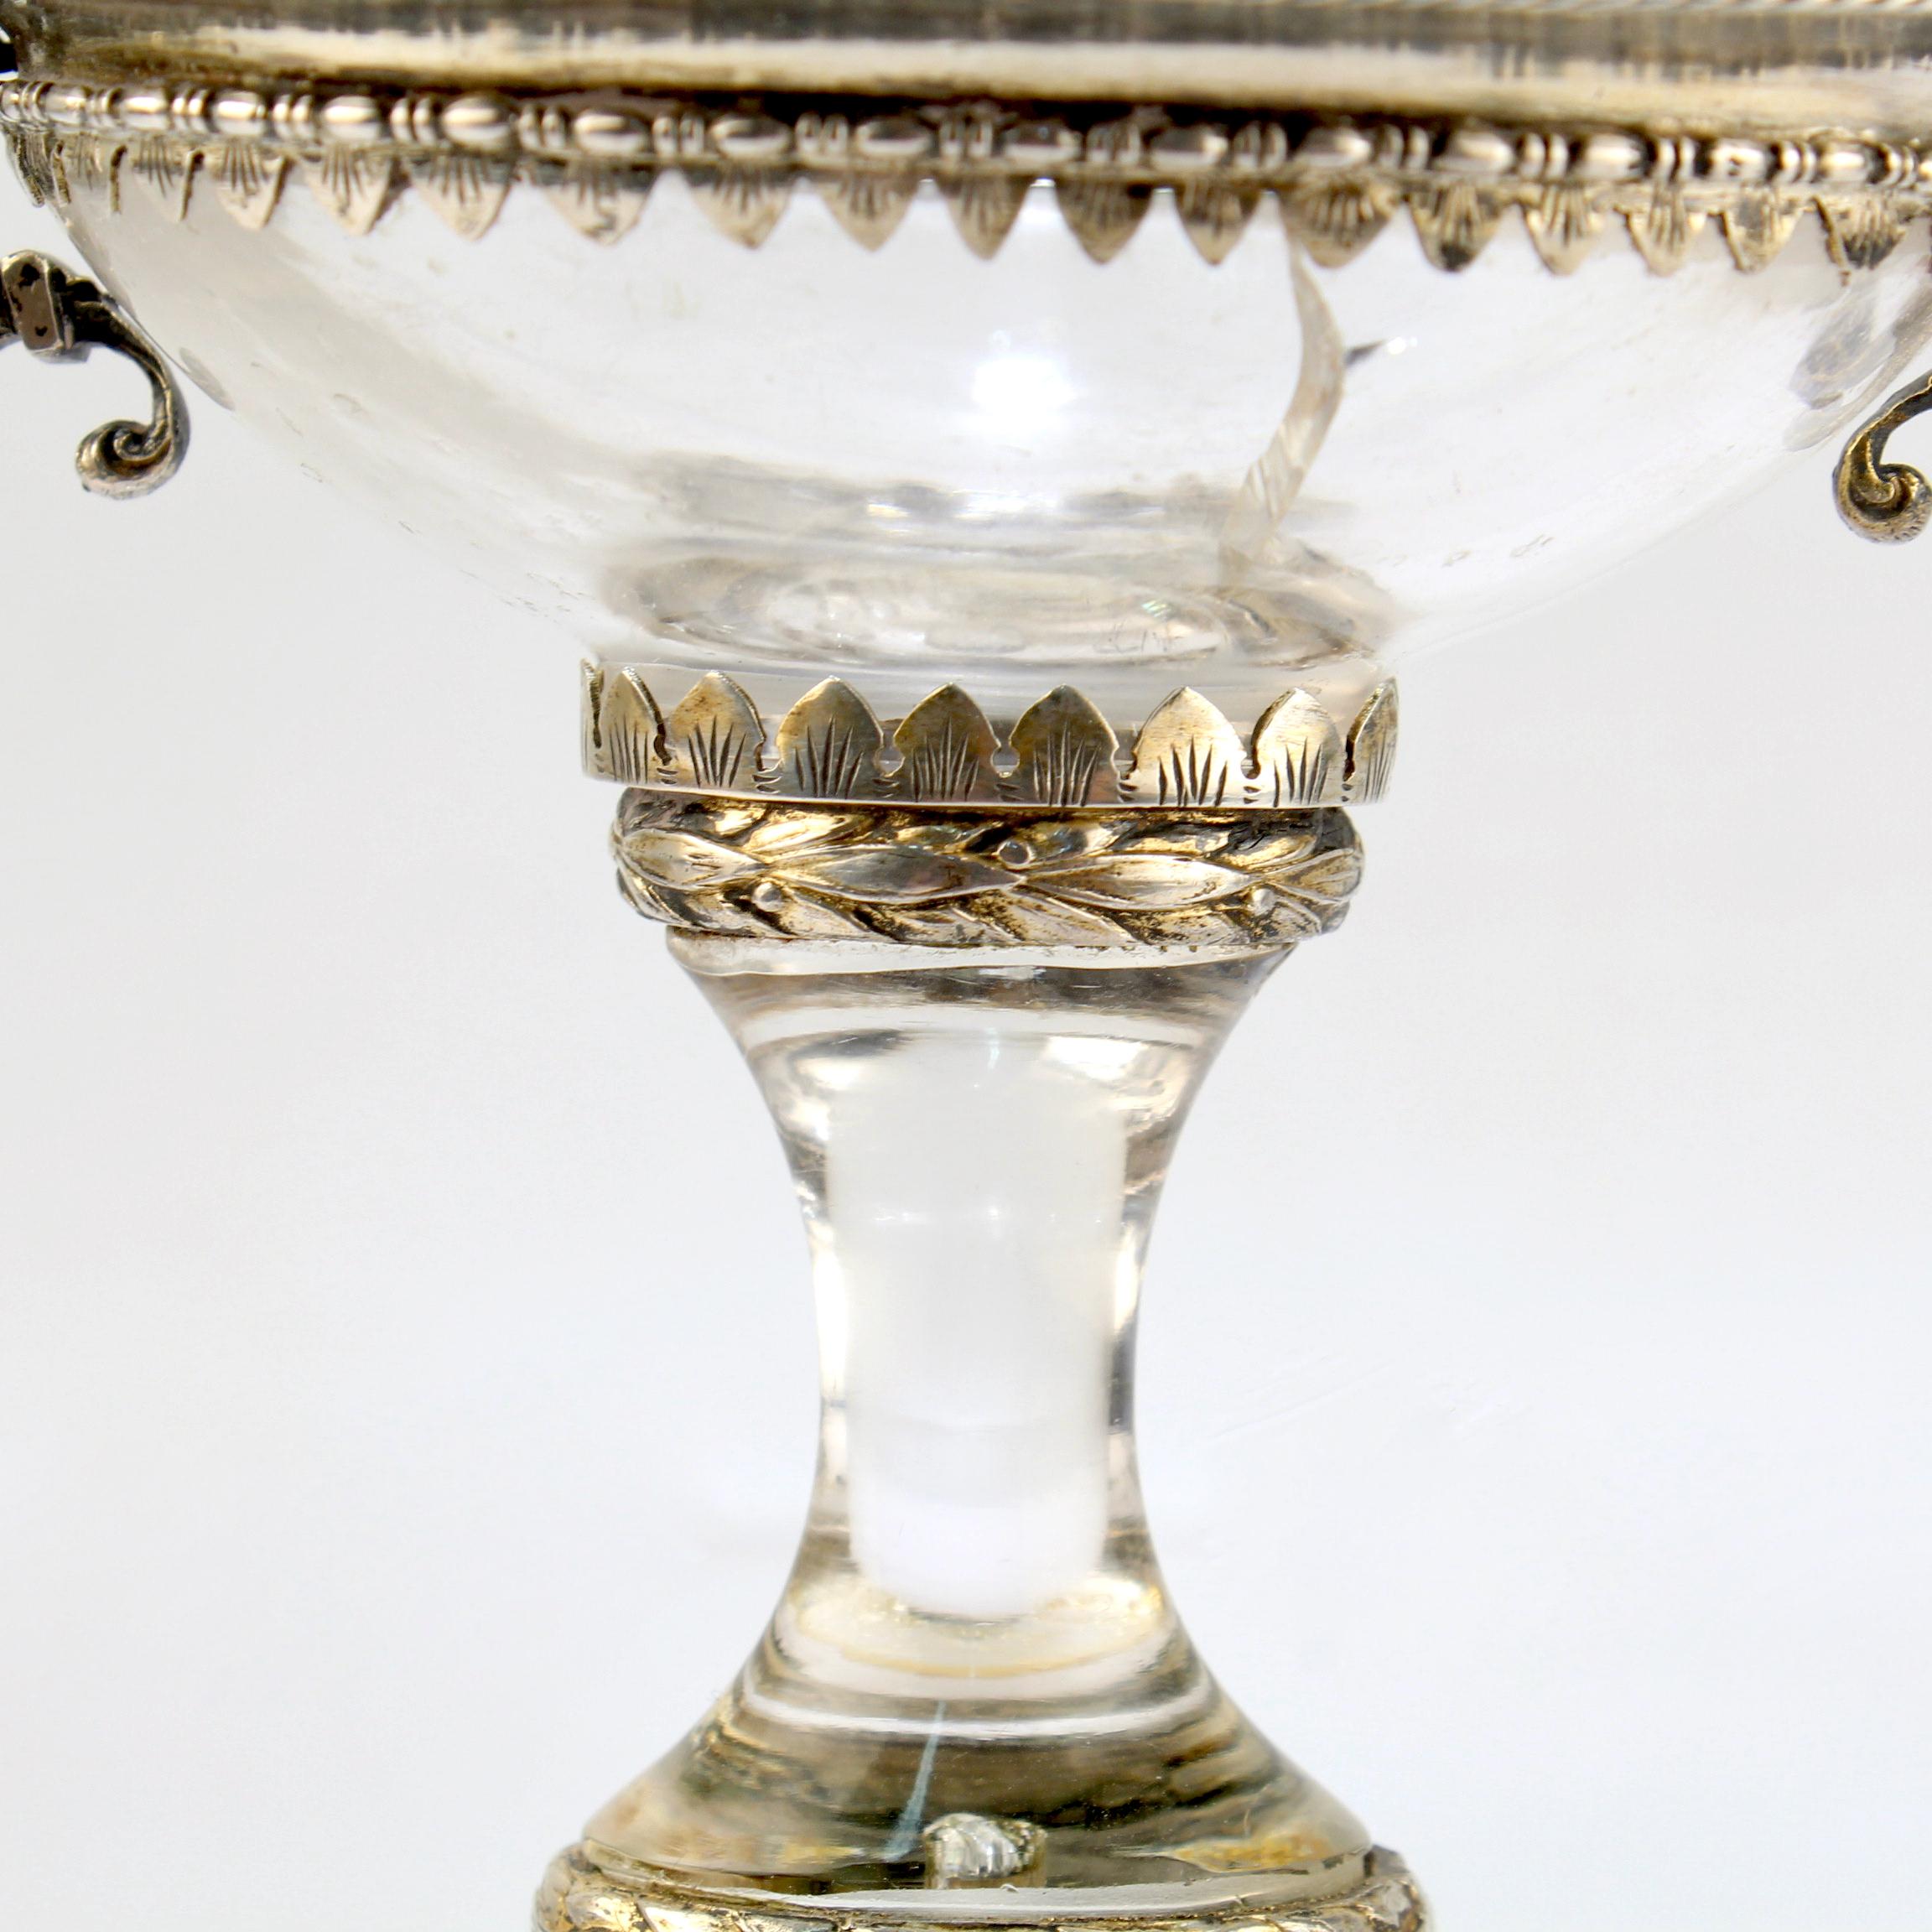 Antique 18th or 19th Century Austrian Silver Mounted Rock Crystal Salt Cellar For Sale 1